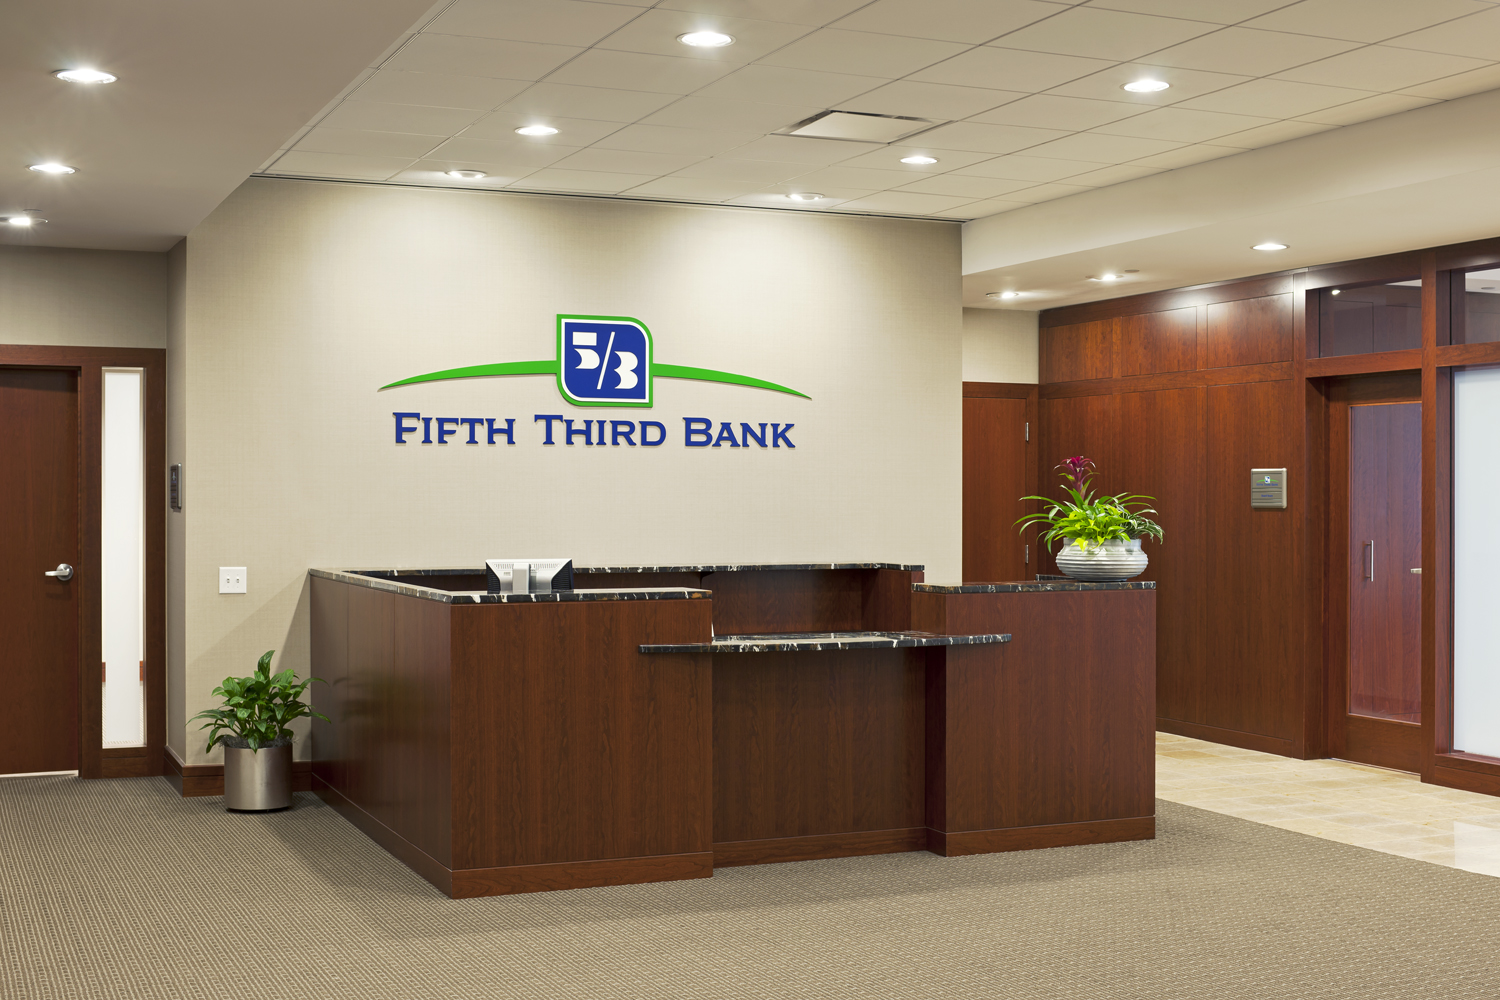 How do you find local Fifth Third Bank locations?